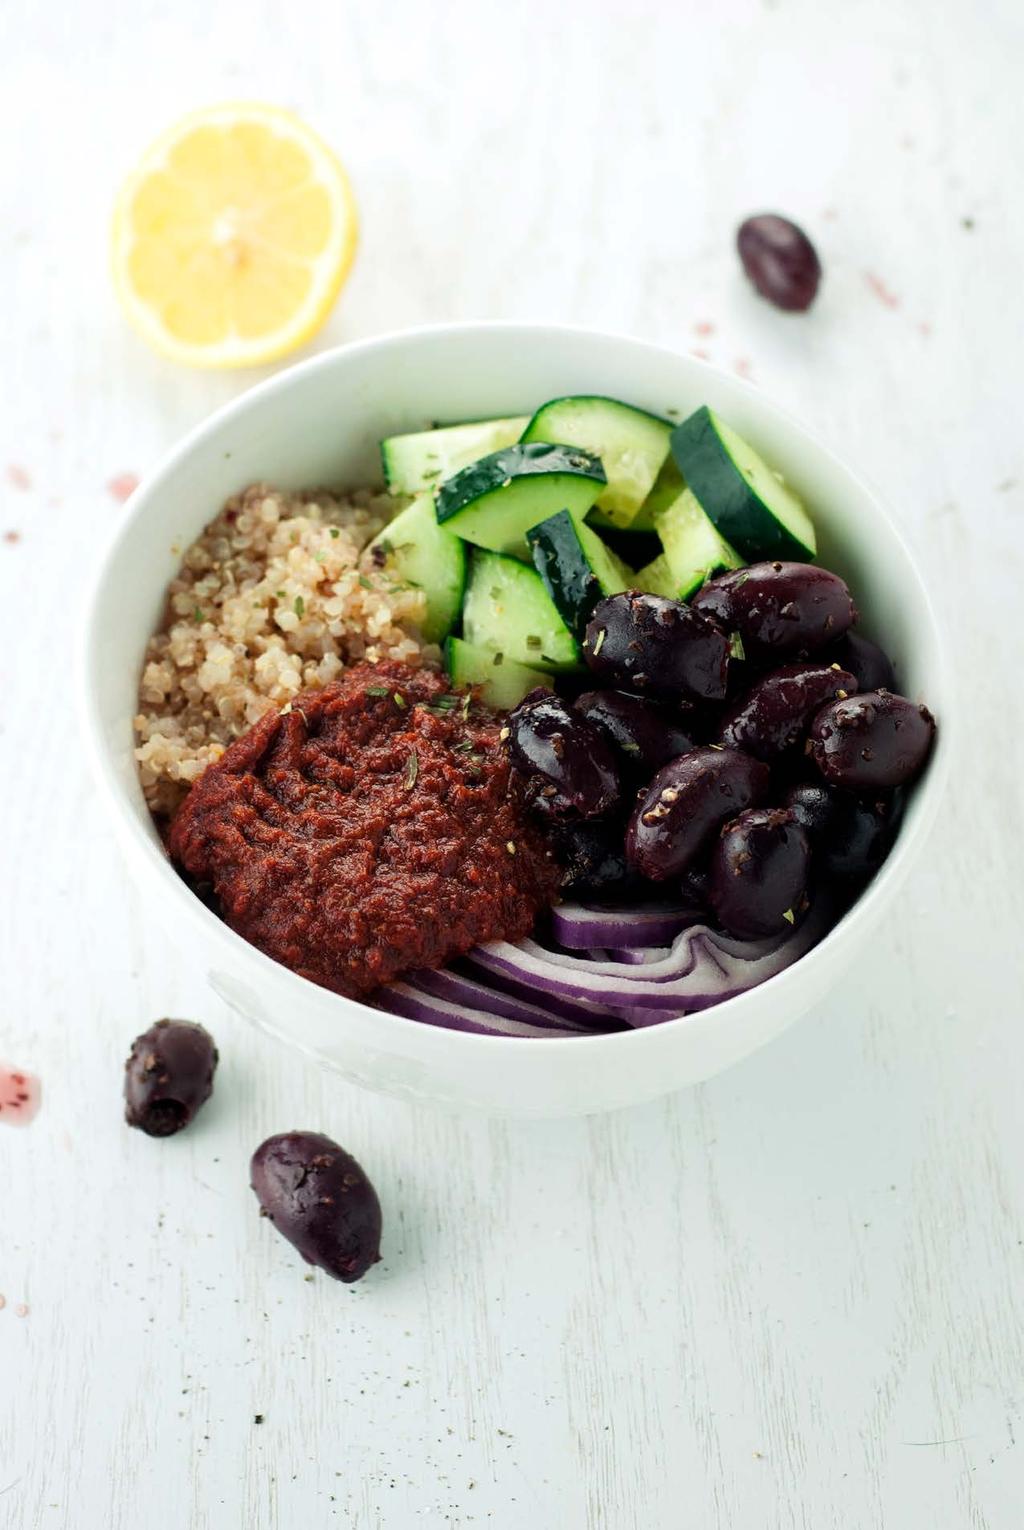 20. Quinoa Lunch Bowl This super simple lunch bowl is filled with hearty flavors while providing a filling meal in just a few minutes time!